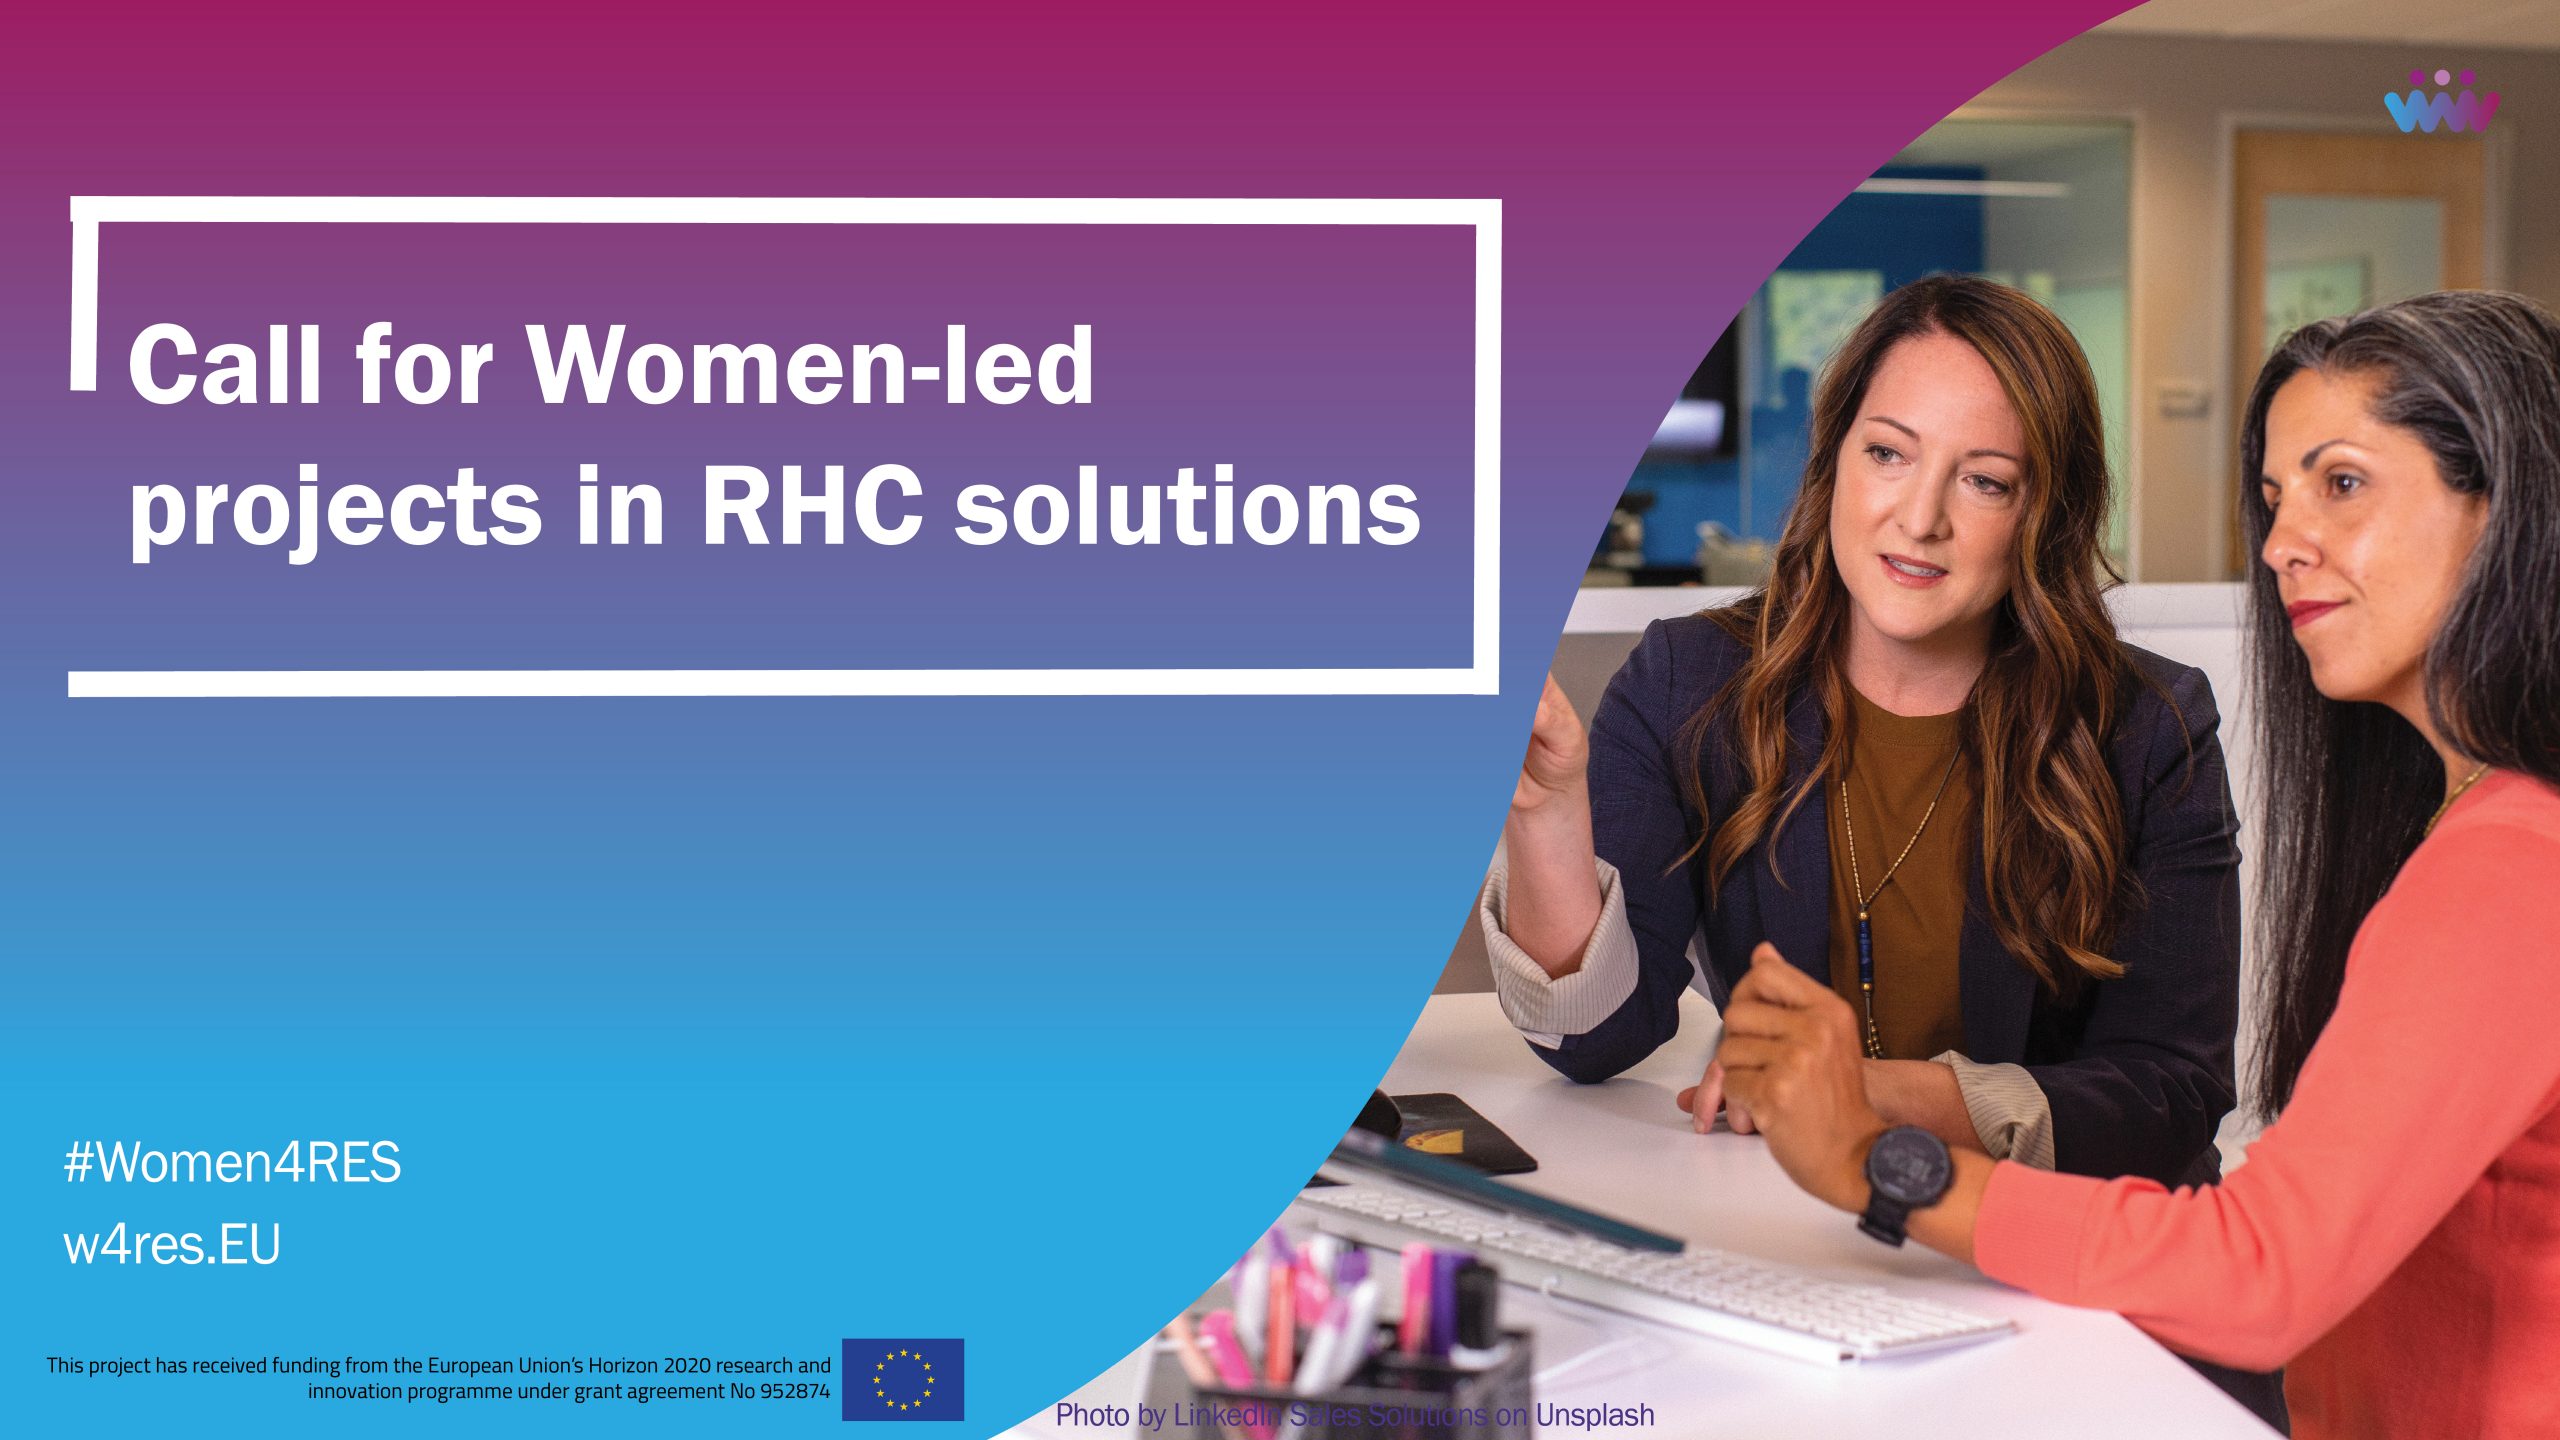 Call for women-led projects in RHC solutions - Deadline extended until 14 October